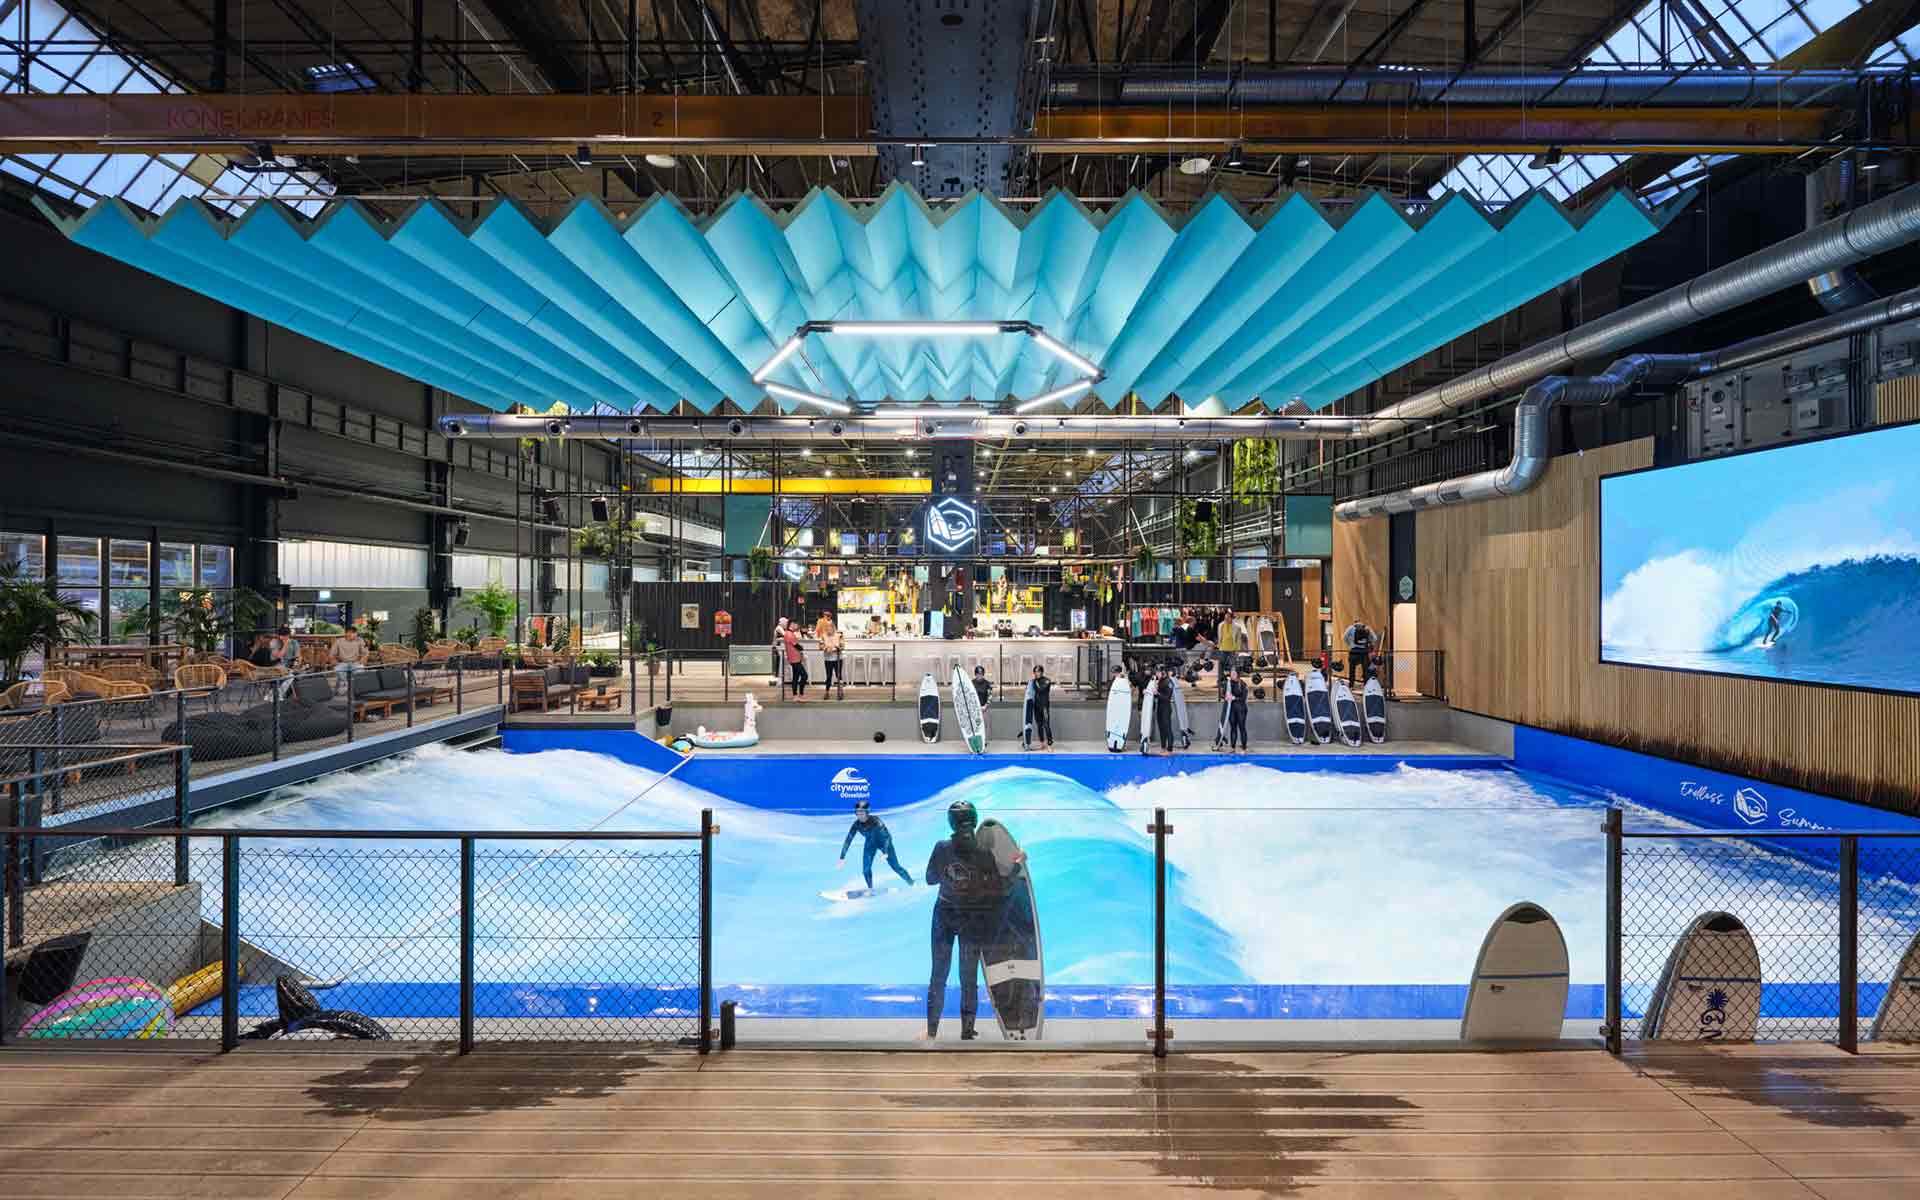 Smart lighting for a unique surfing experience at “Rheinriff”